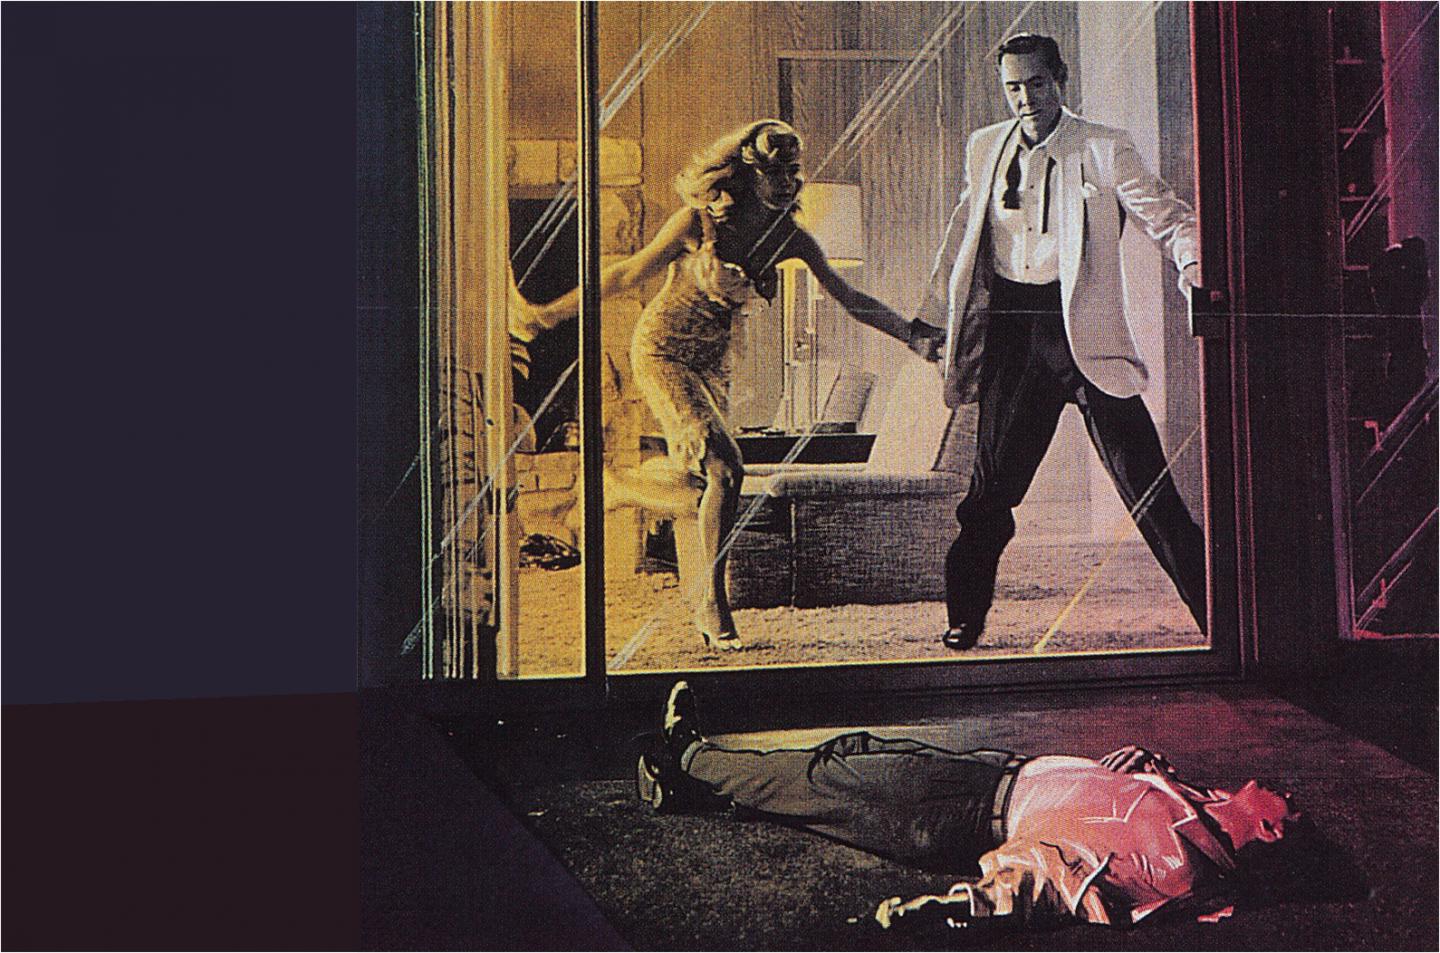 A woman grabbing the hand of a man standing in front of a sliding glass door with another man laying on the ground on the other side who appears to be dead.